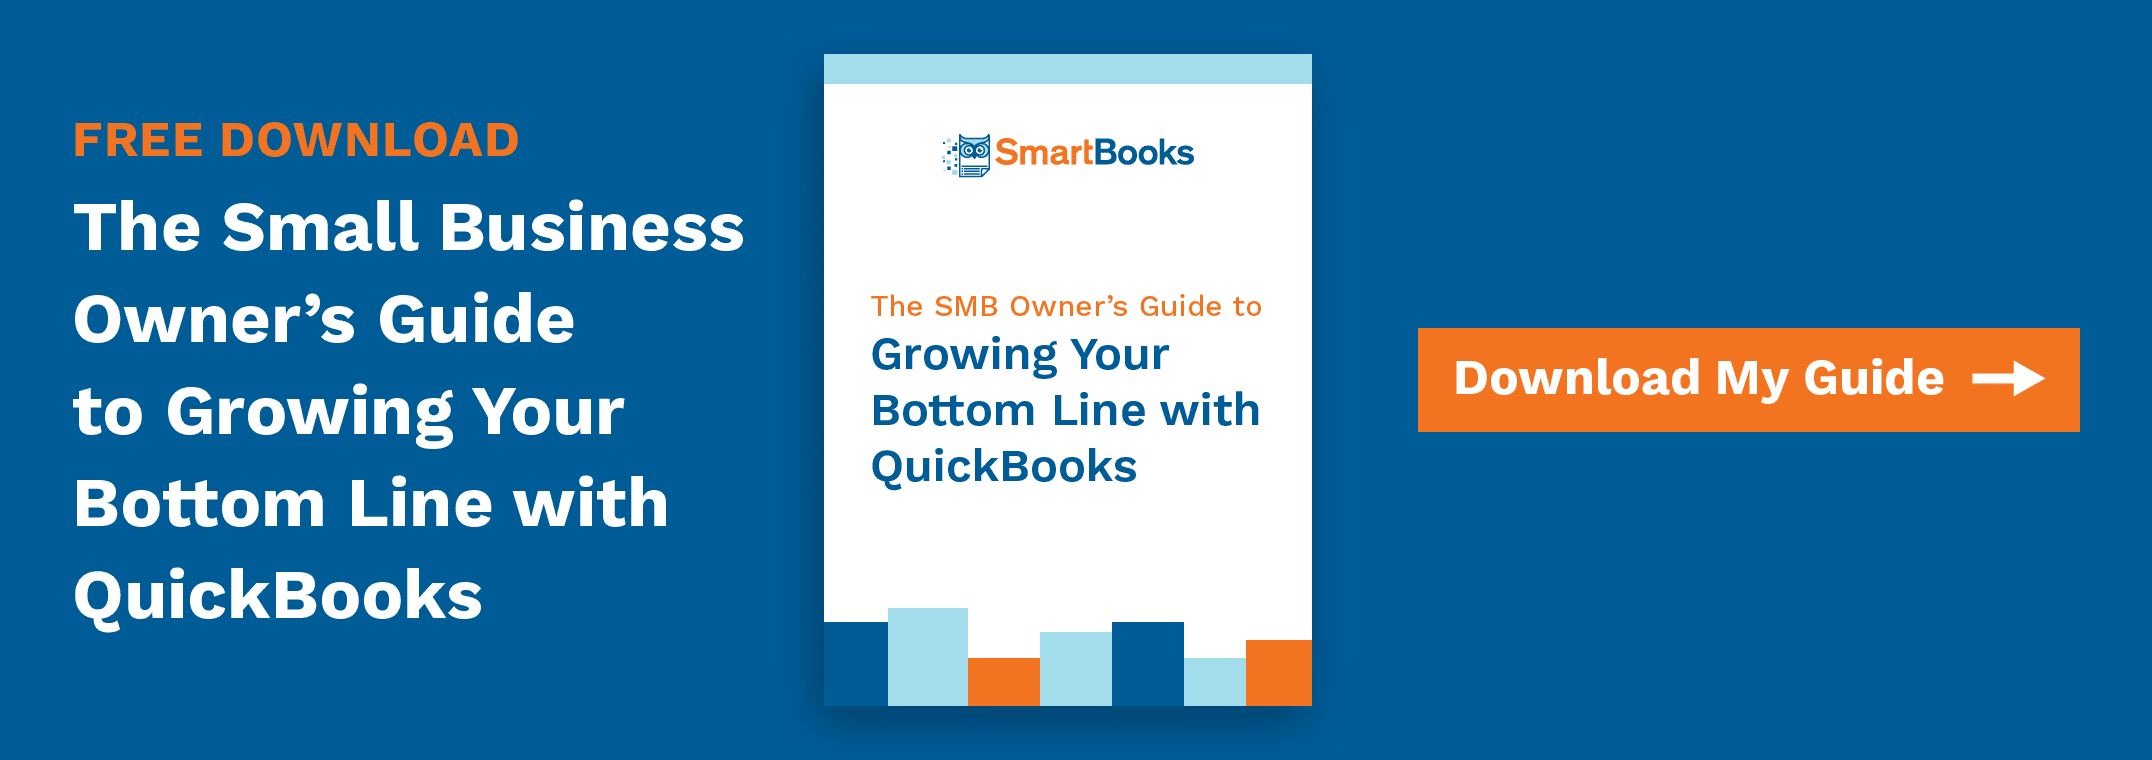 The Small Business Owner’s Guide to Growing Your Bottom Line with QuickBooks